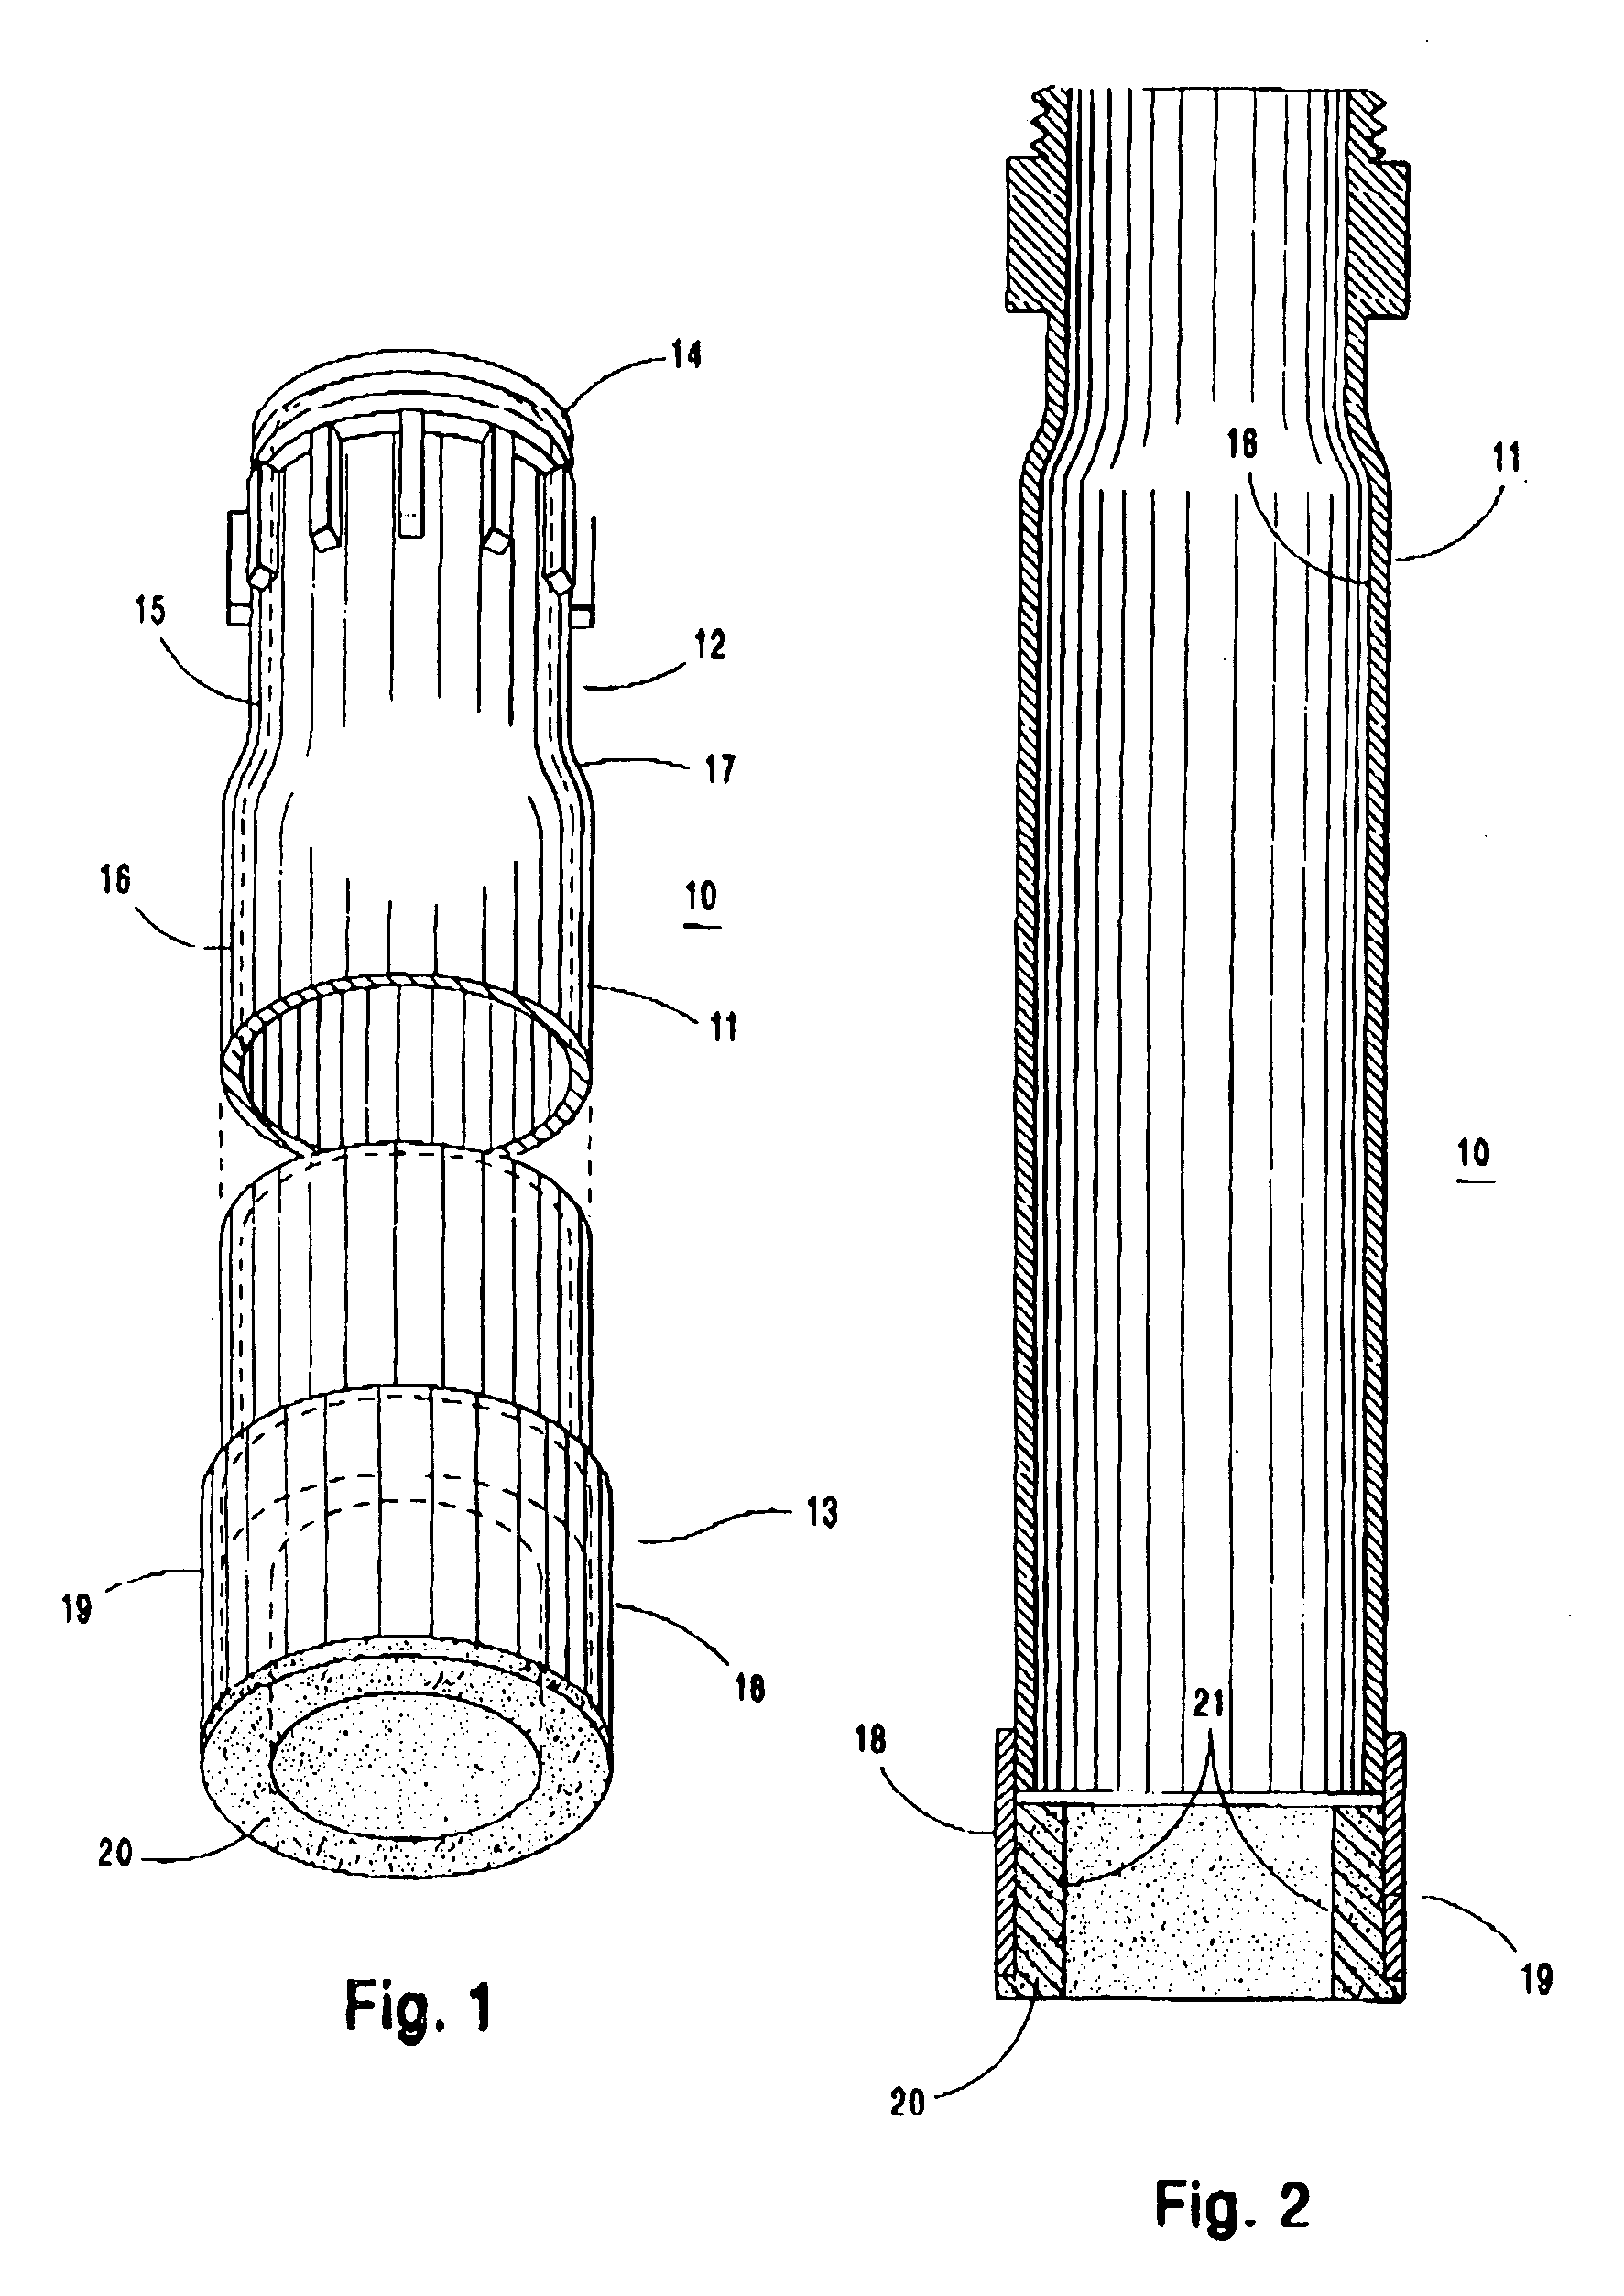 Slip-joint connection for electric service conduit to service boxes